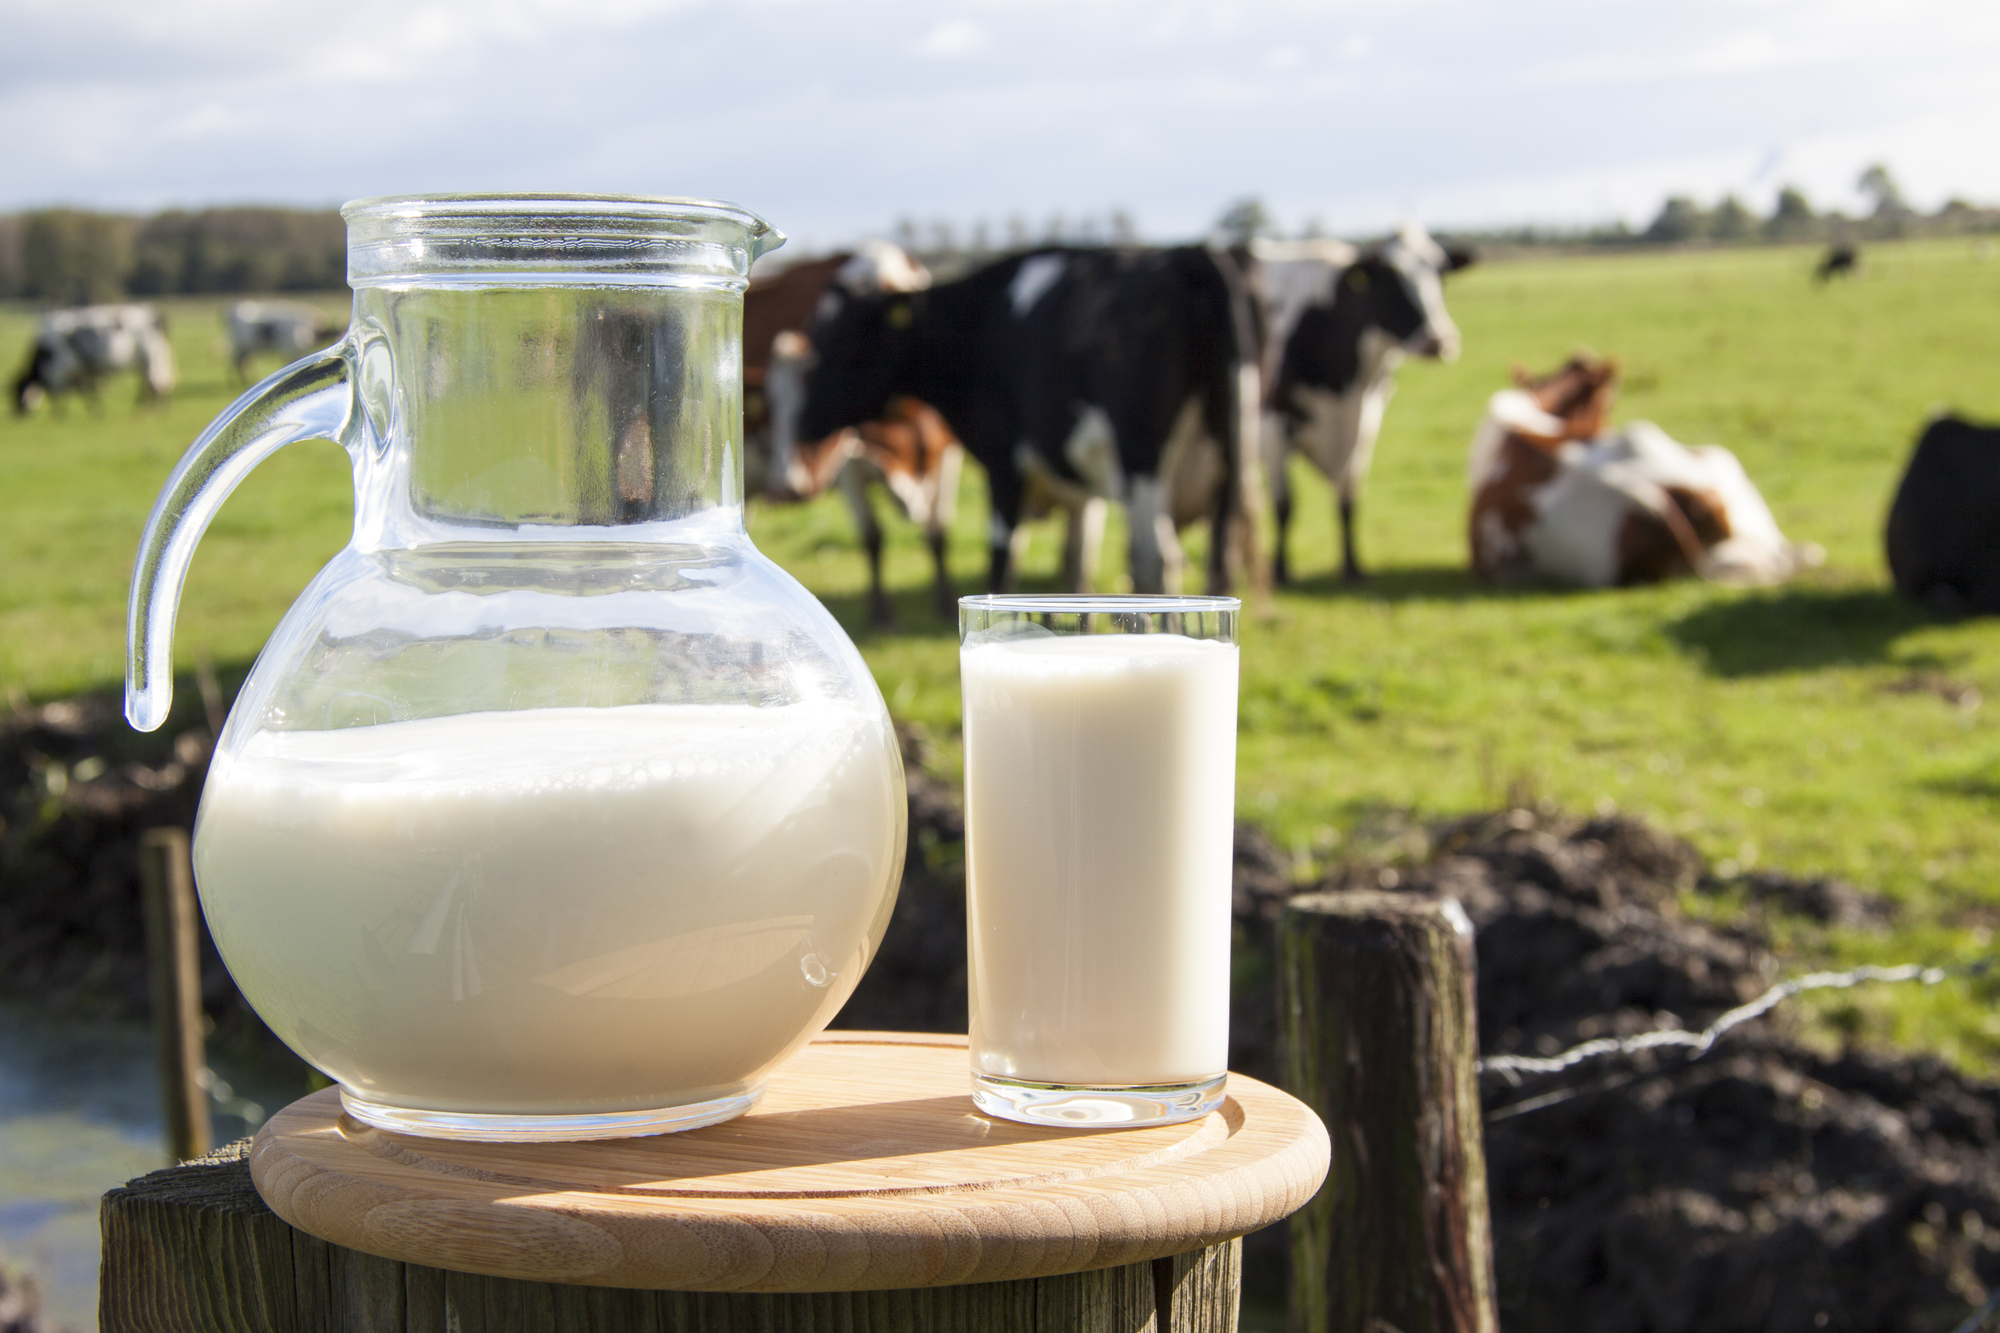 A pitcher of milk and glasses on a table with a field of cows in the background